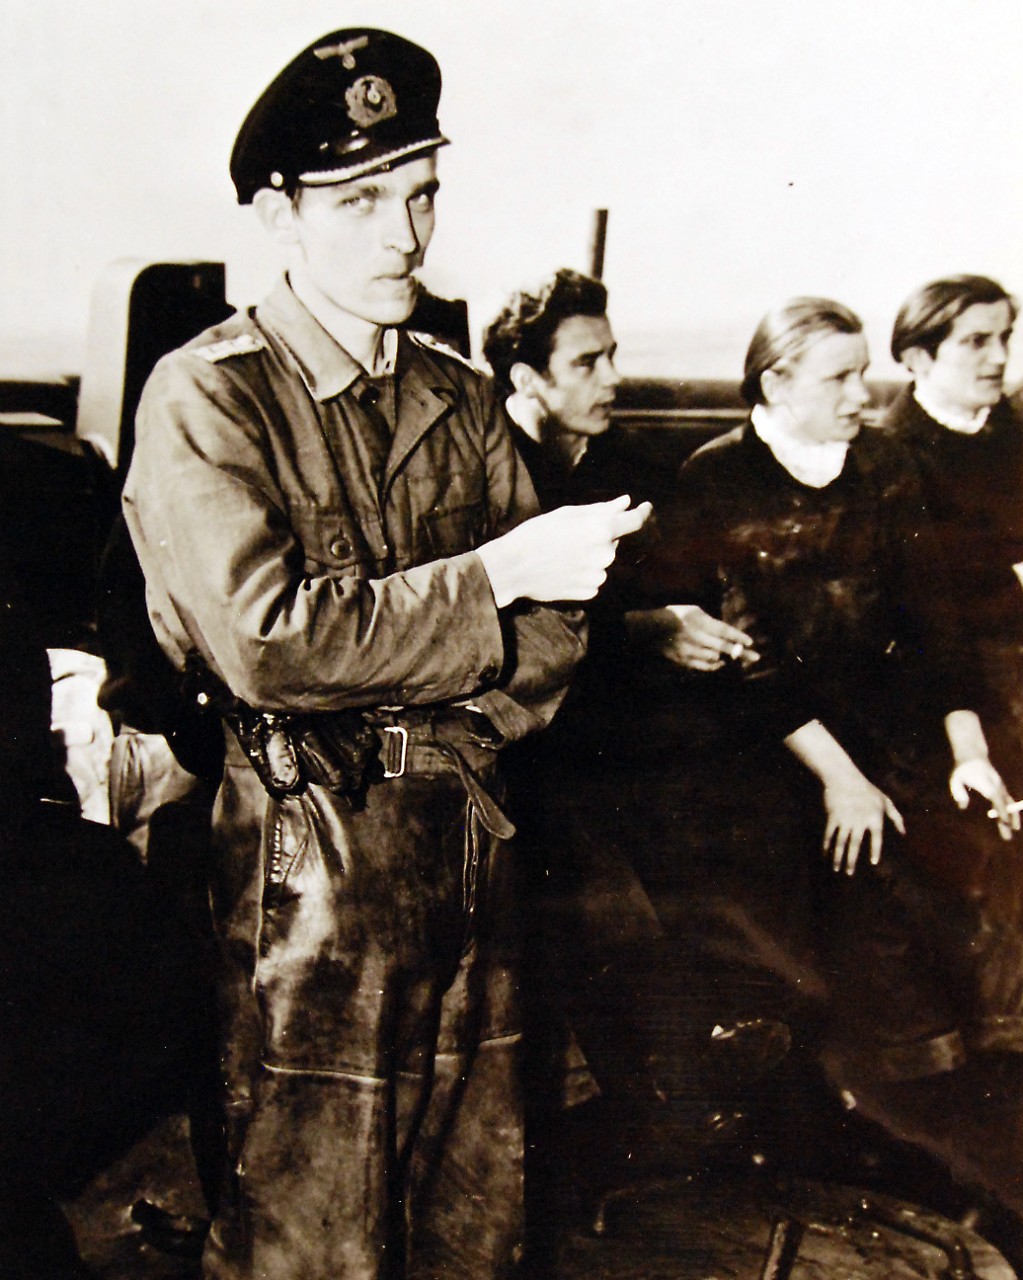 <p>80-G-700489: Surrender of German U-Boats, 1945. Lieutenant Thilo Bode, Captain of the German submarine, U-858, aboard the tug which met the U boat and her escorts off Cape May, New Jersey, May 1945. Photograph released May 10, 1945.&nbsp;</p>
